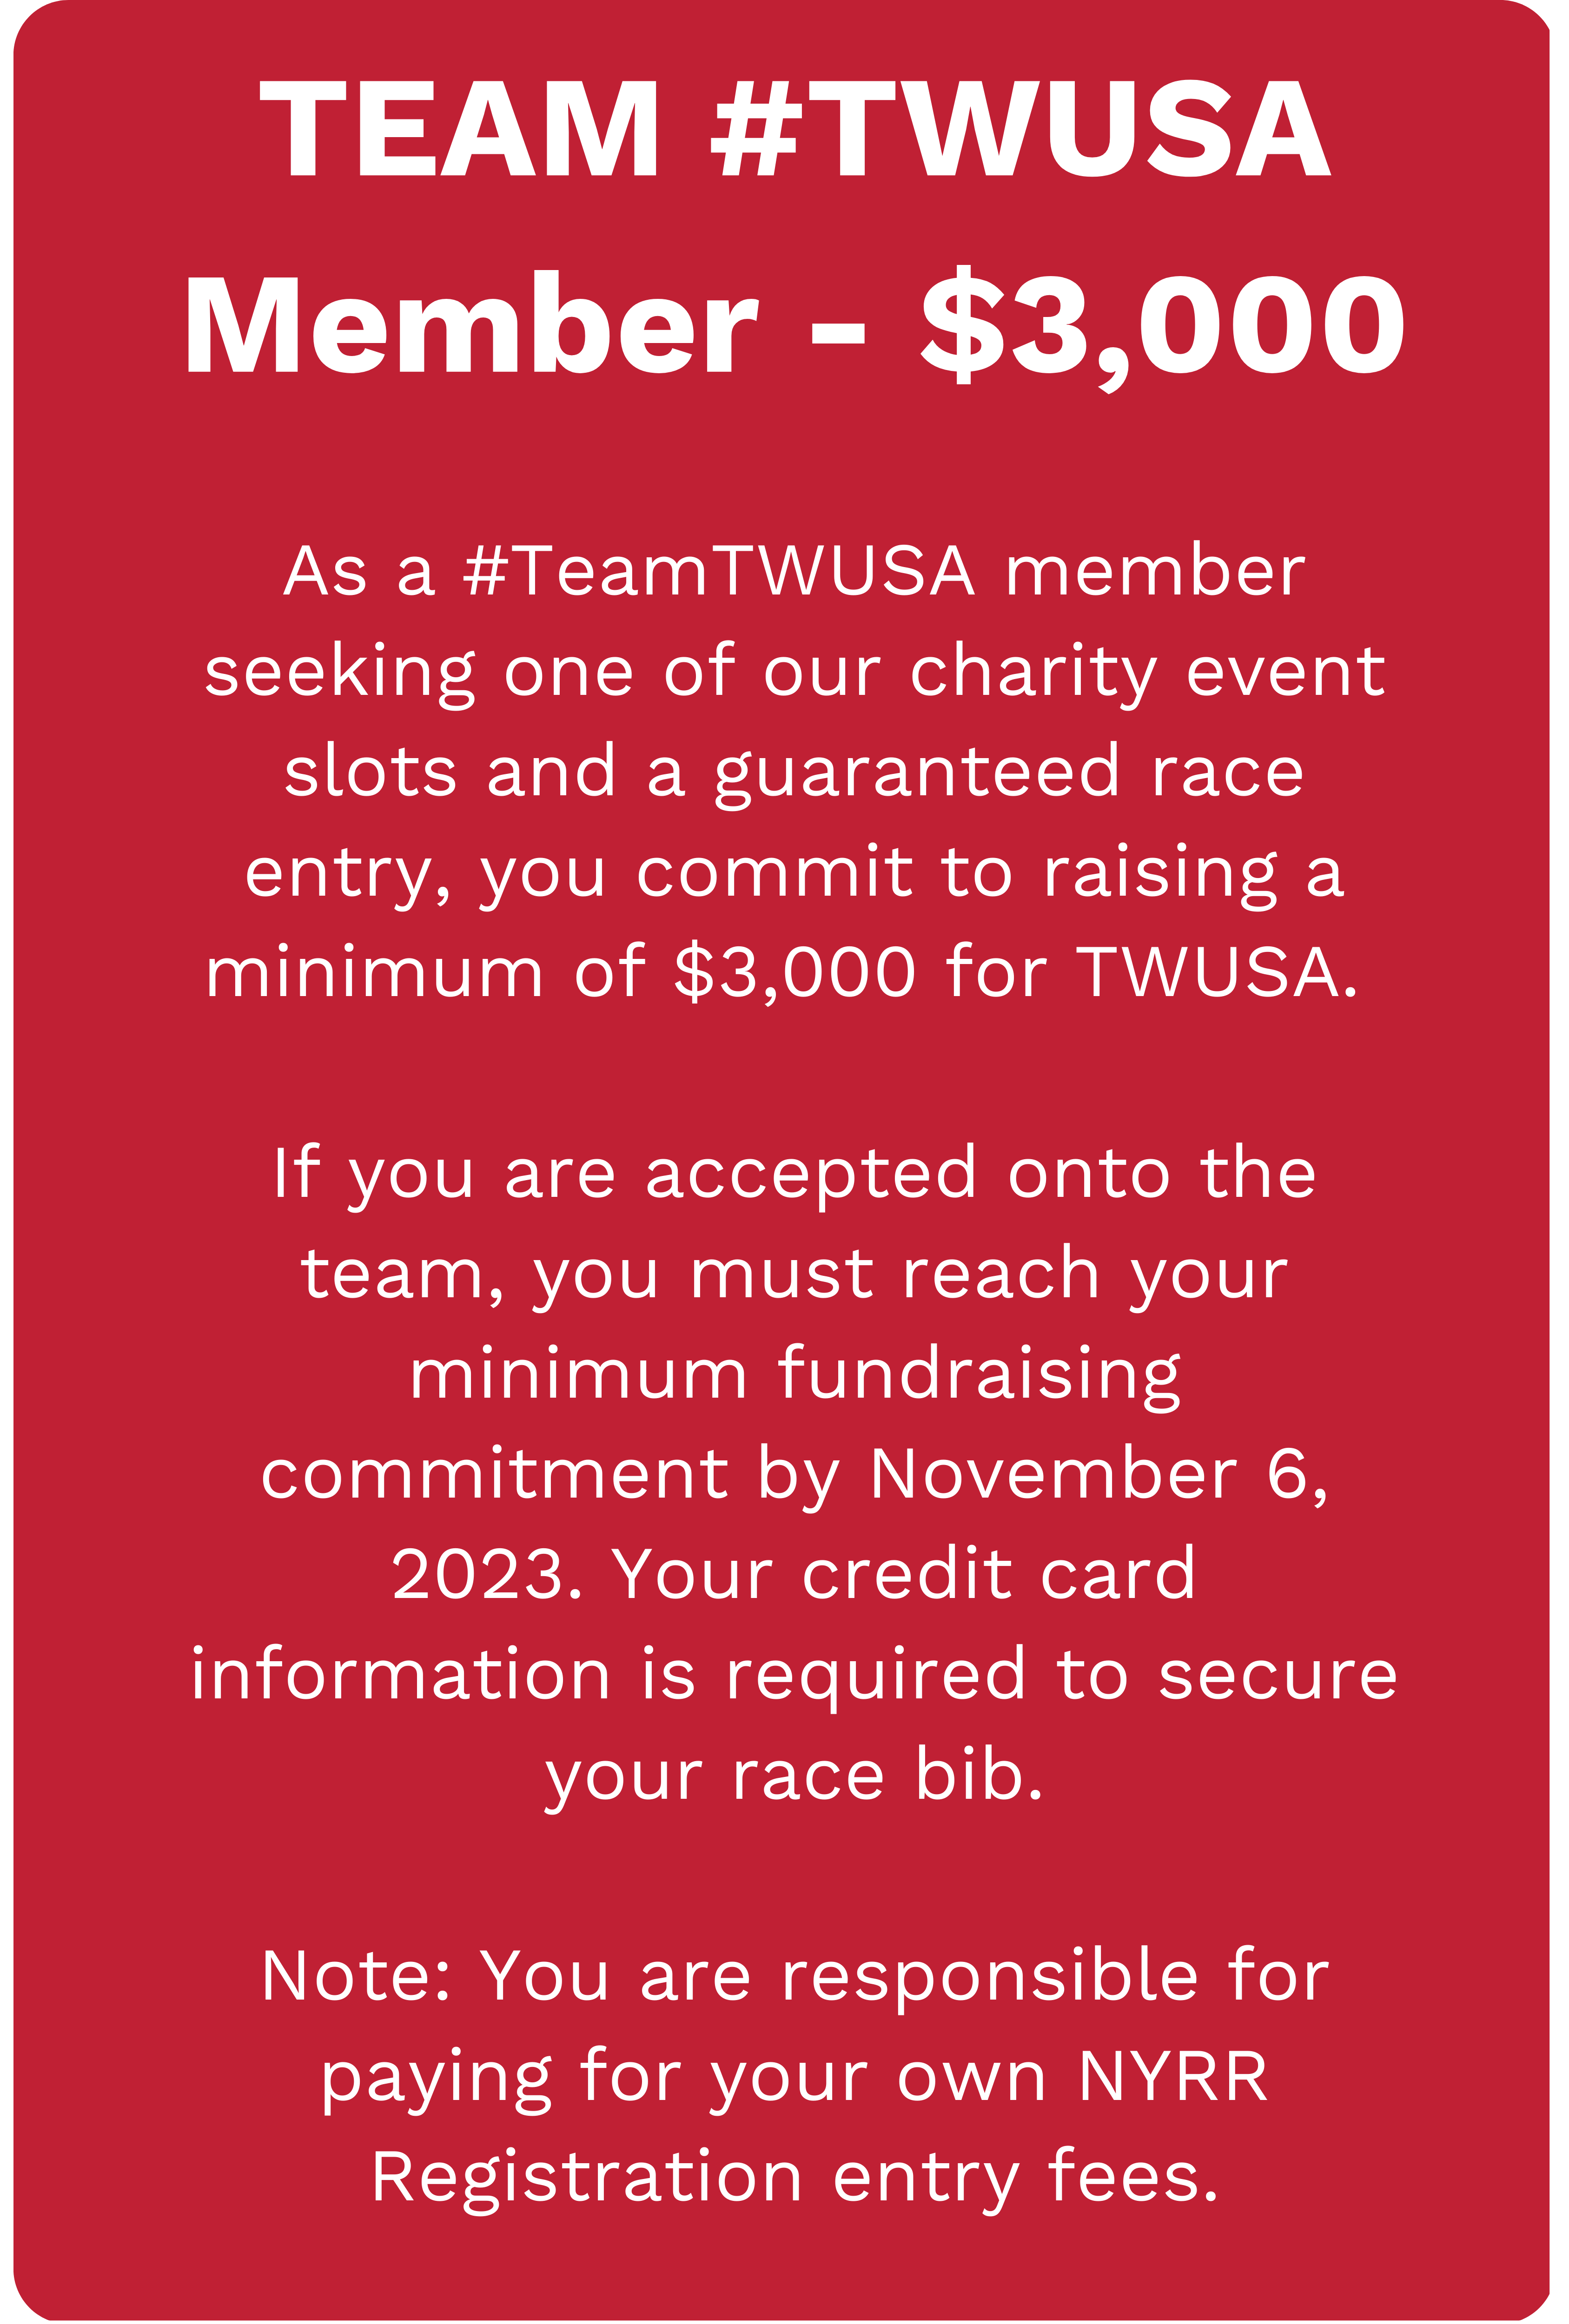 TEAM #TWUSA Member - $3,000. As a #TeamTWUSA member seeking one of our charity event slots and a guaranteed race entry, you commit to raising a minimum of $3,000 for TWUSA. If you are accepted onto the team, you must reach your minimum fundraising commitment by November 6, 2023. Your credit card information is required to secure your race bib. Note: You are responsible for paying for your own NYRR Registration entry fees